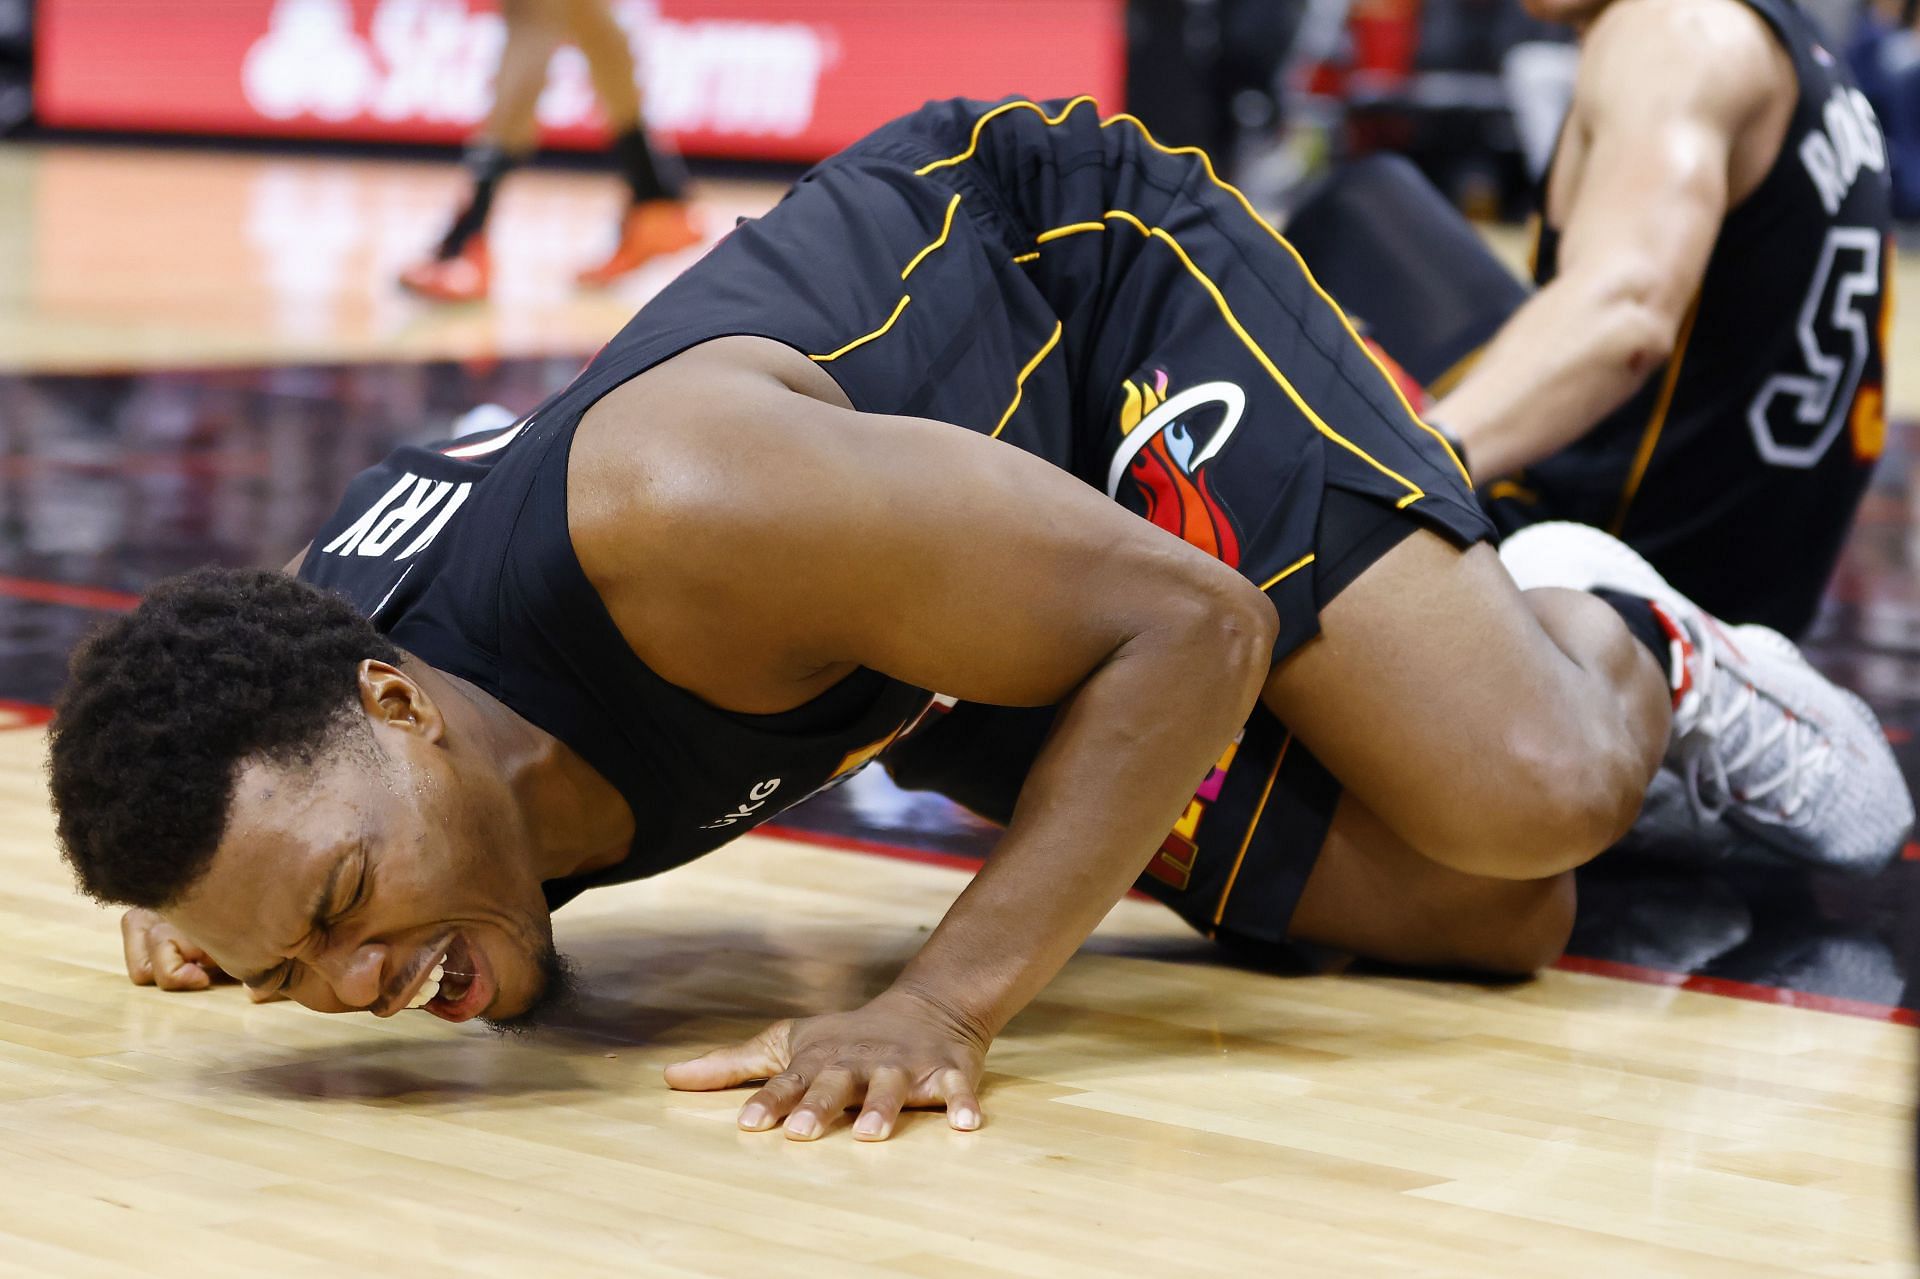 Kyle Lowry of the Miami Heat injured his ankle